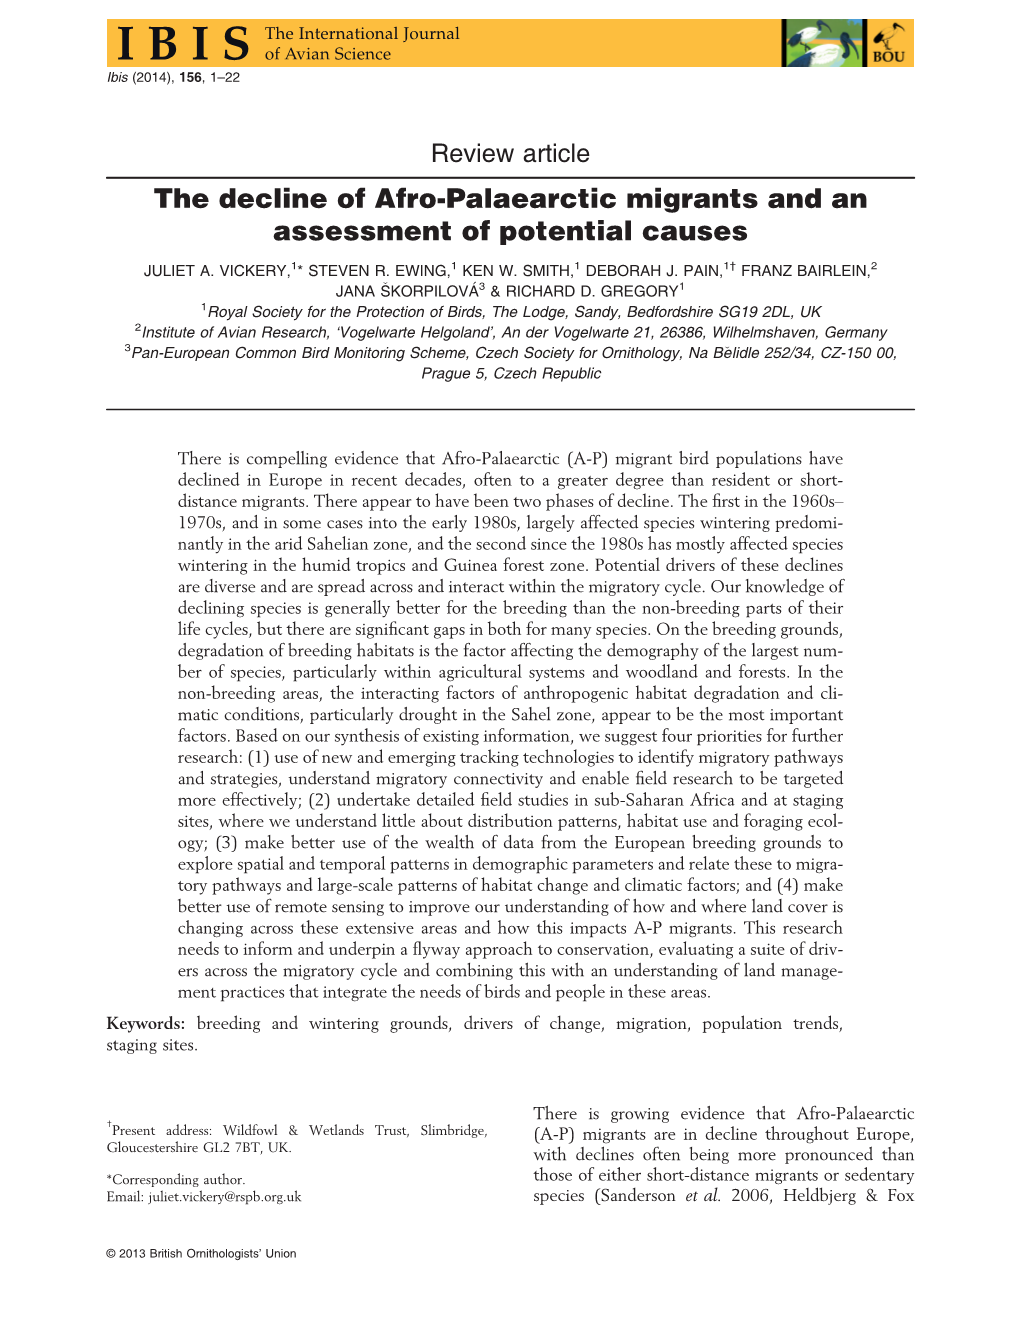 The Decline of Afro-Palaearctic Migrants and an Assessment of Potential Causes